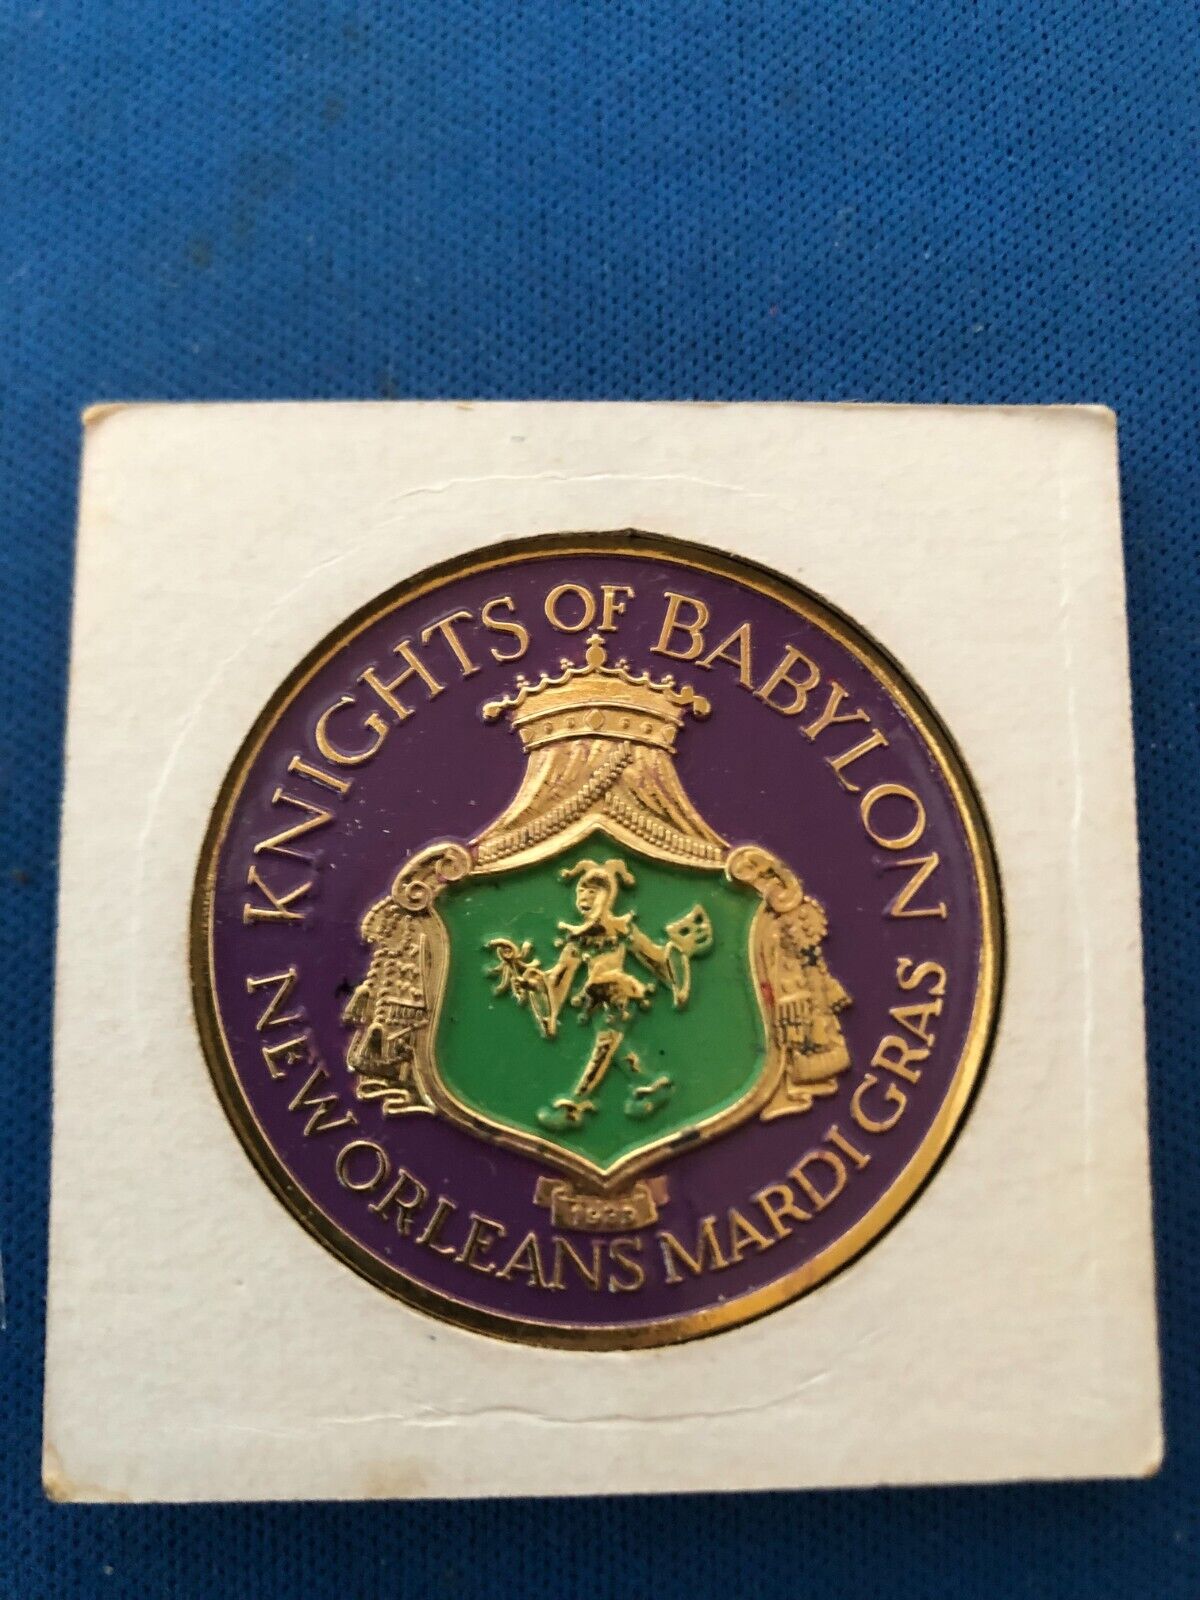 Vintage 1971 Knights of Babylon the Student Prince N.O. Mardi Gras Doubloon